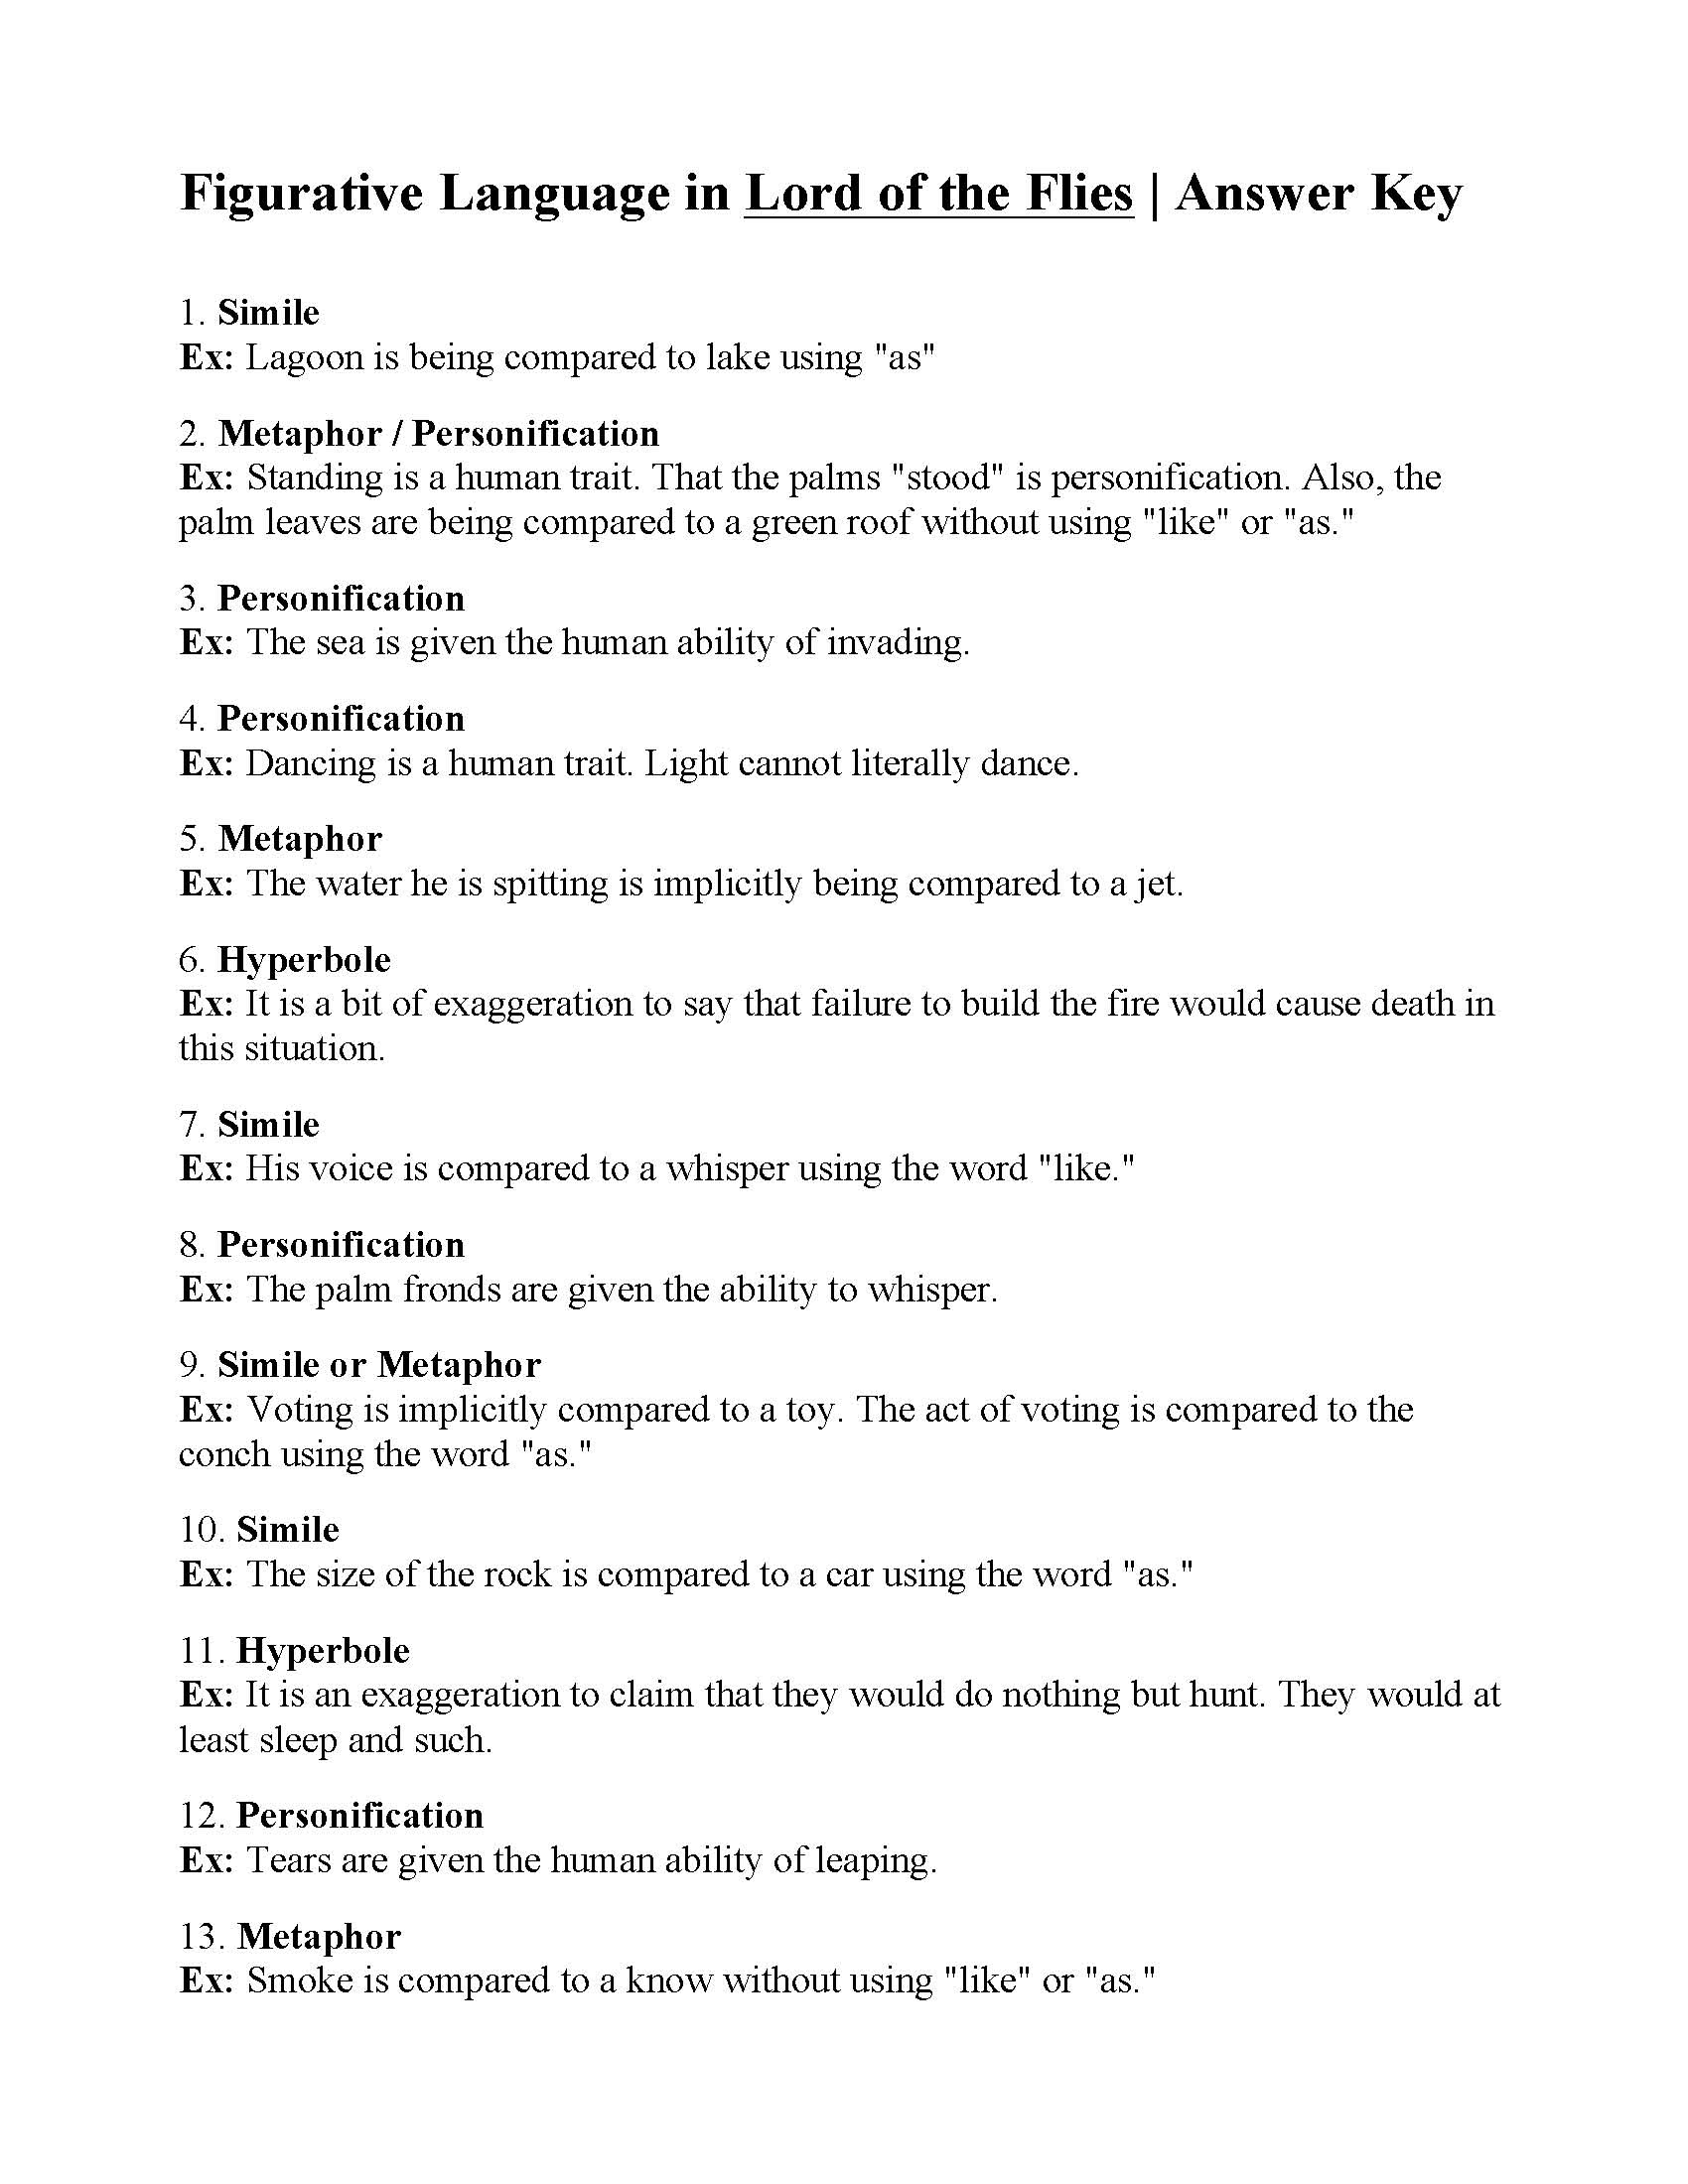 Figurative Language Worksheet Lord Of The Flies Answers